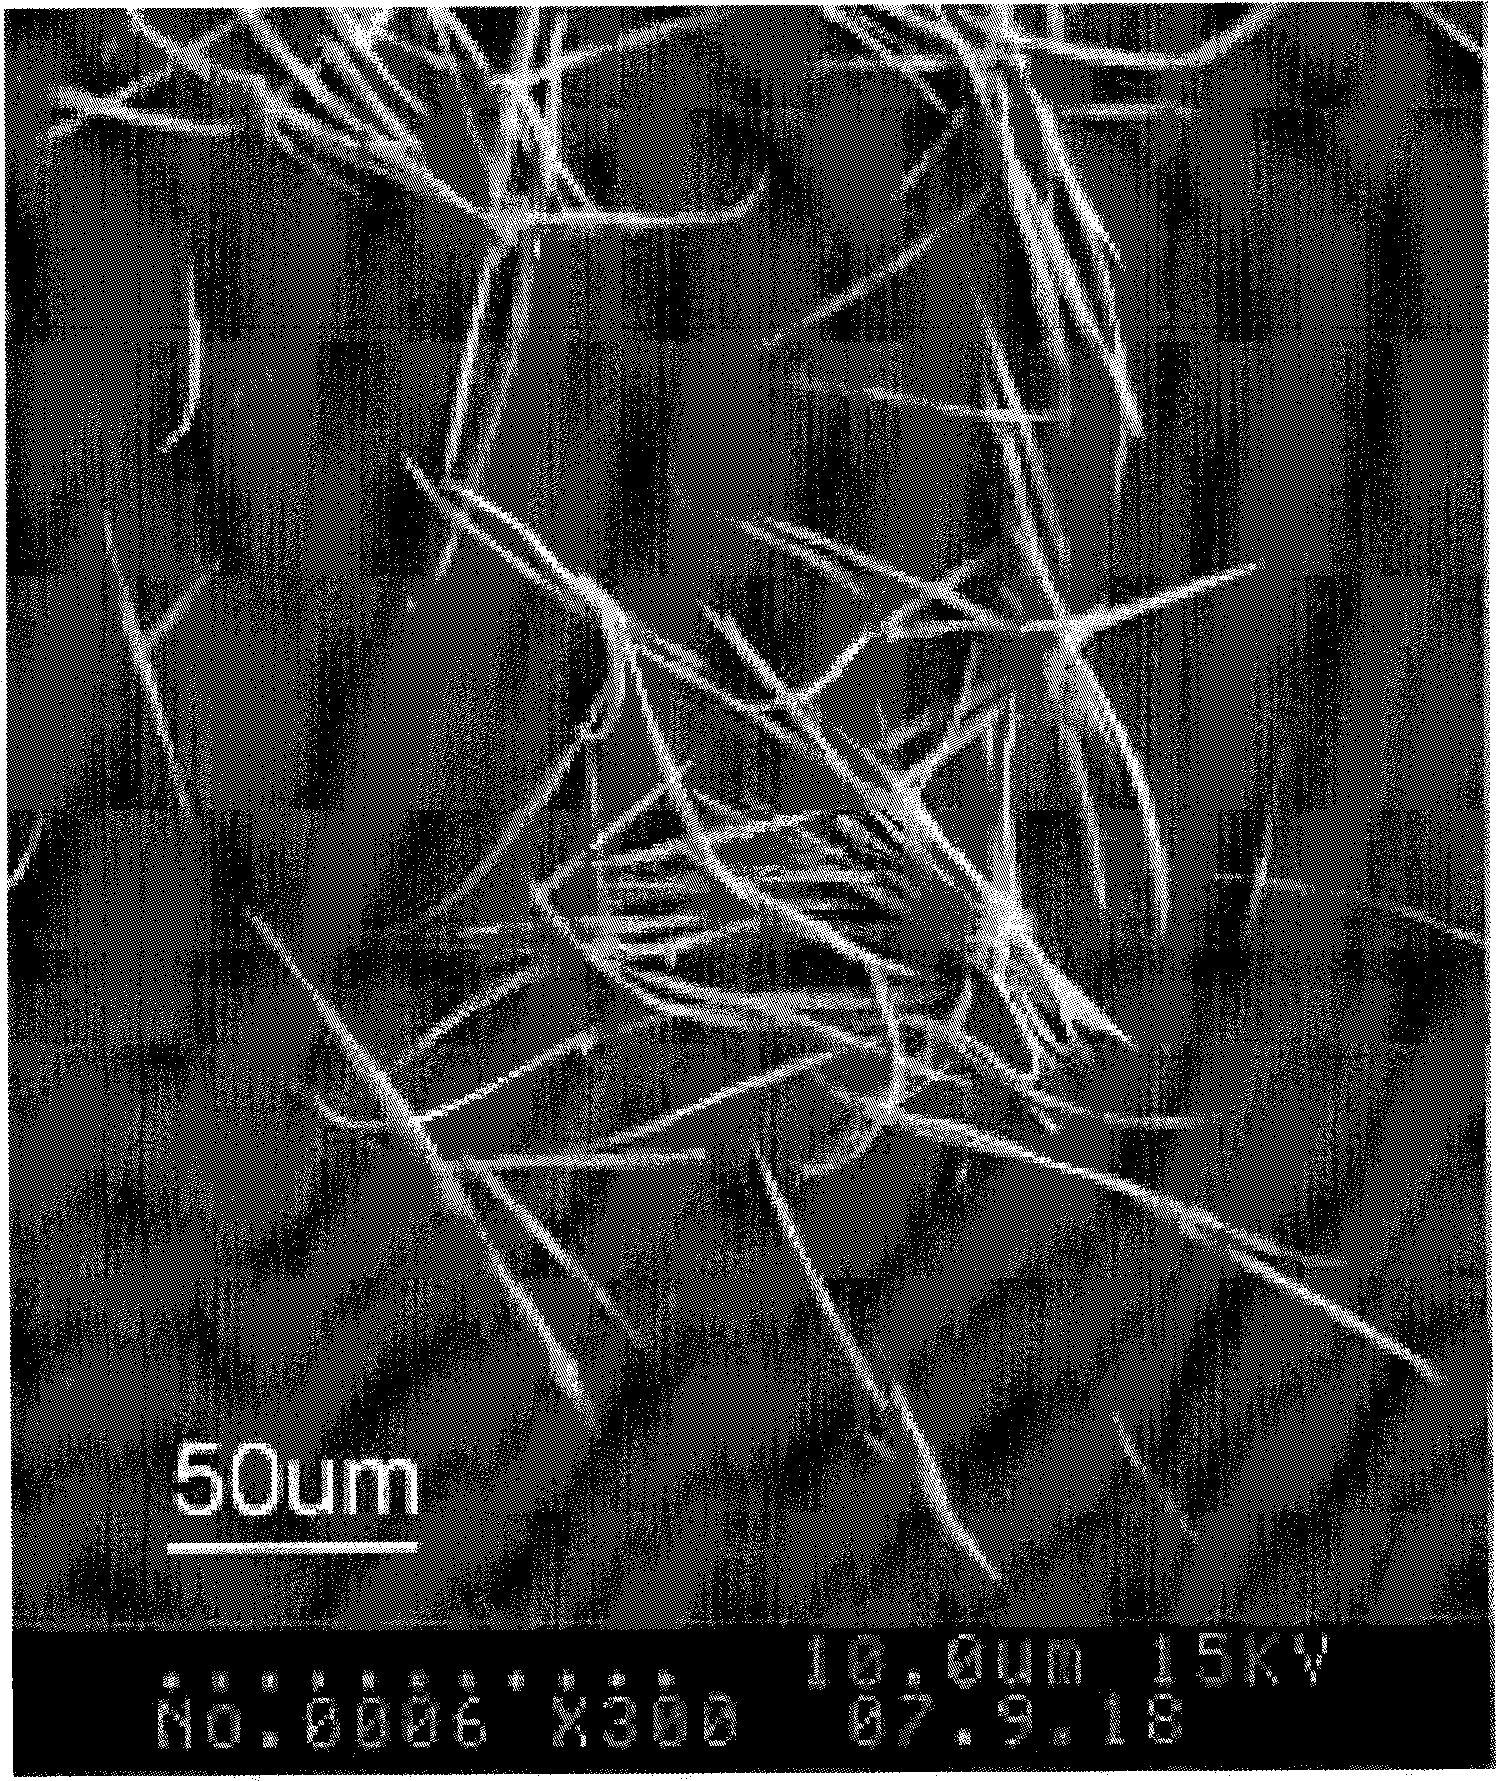 Method for separating and extracting fibrillar structure body in natural keratin fiber with reducing solvent